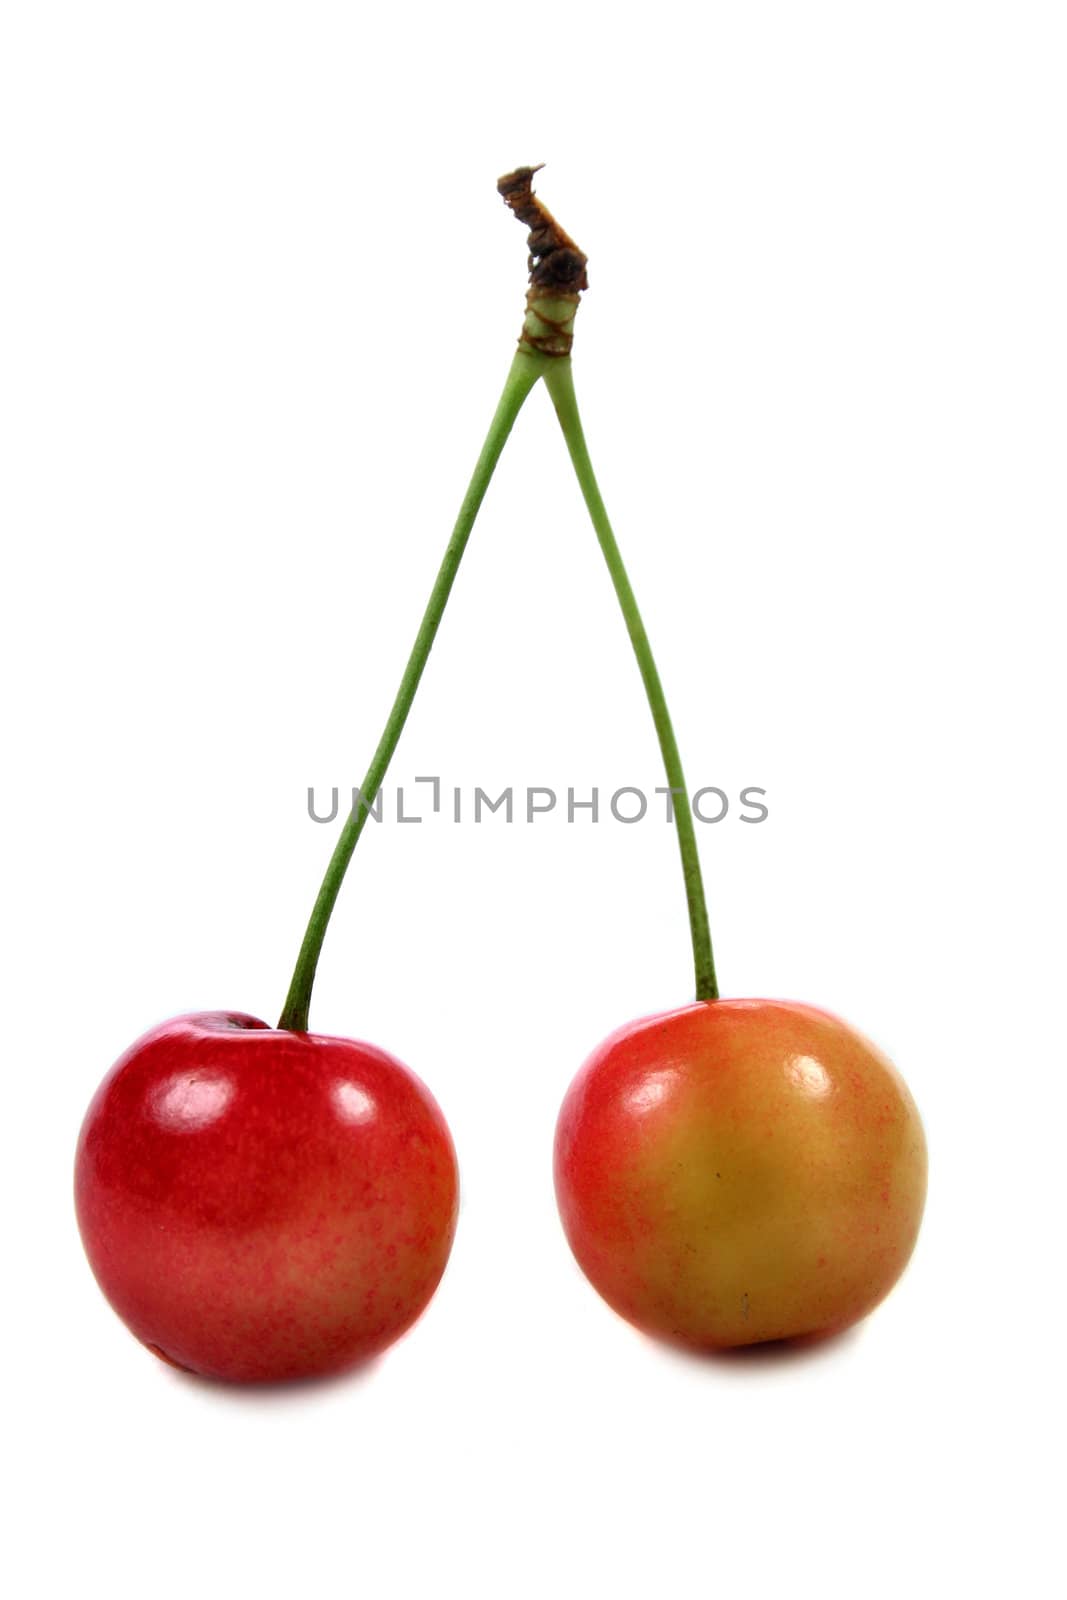 a pair of cherries on a white background